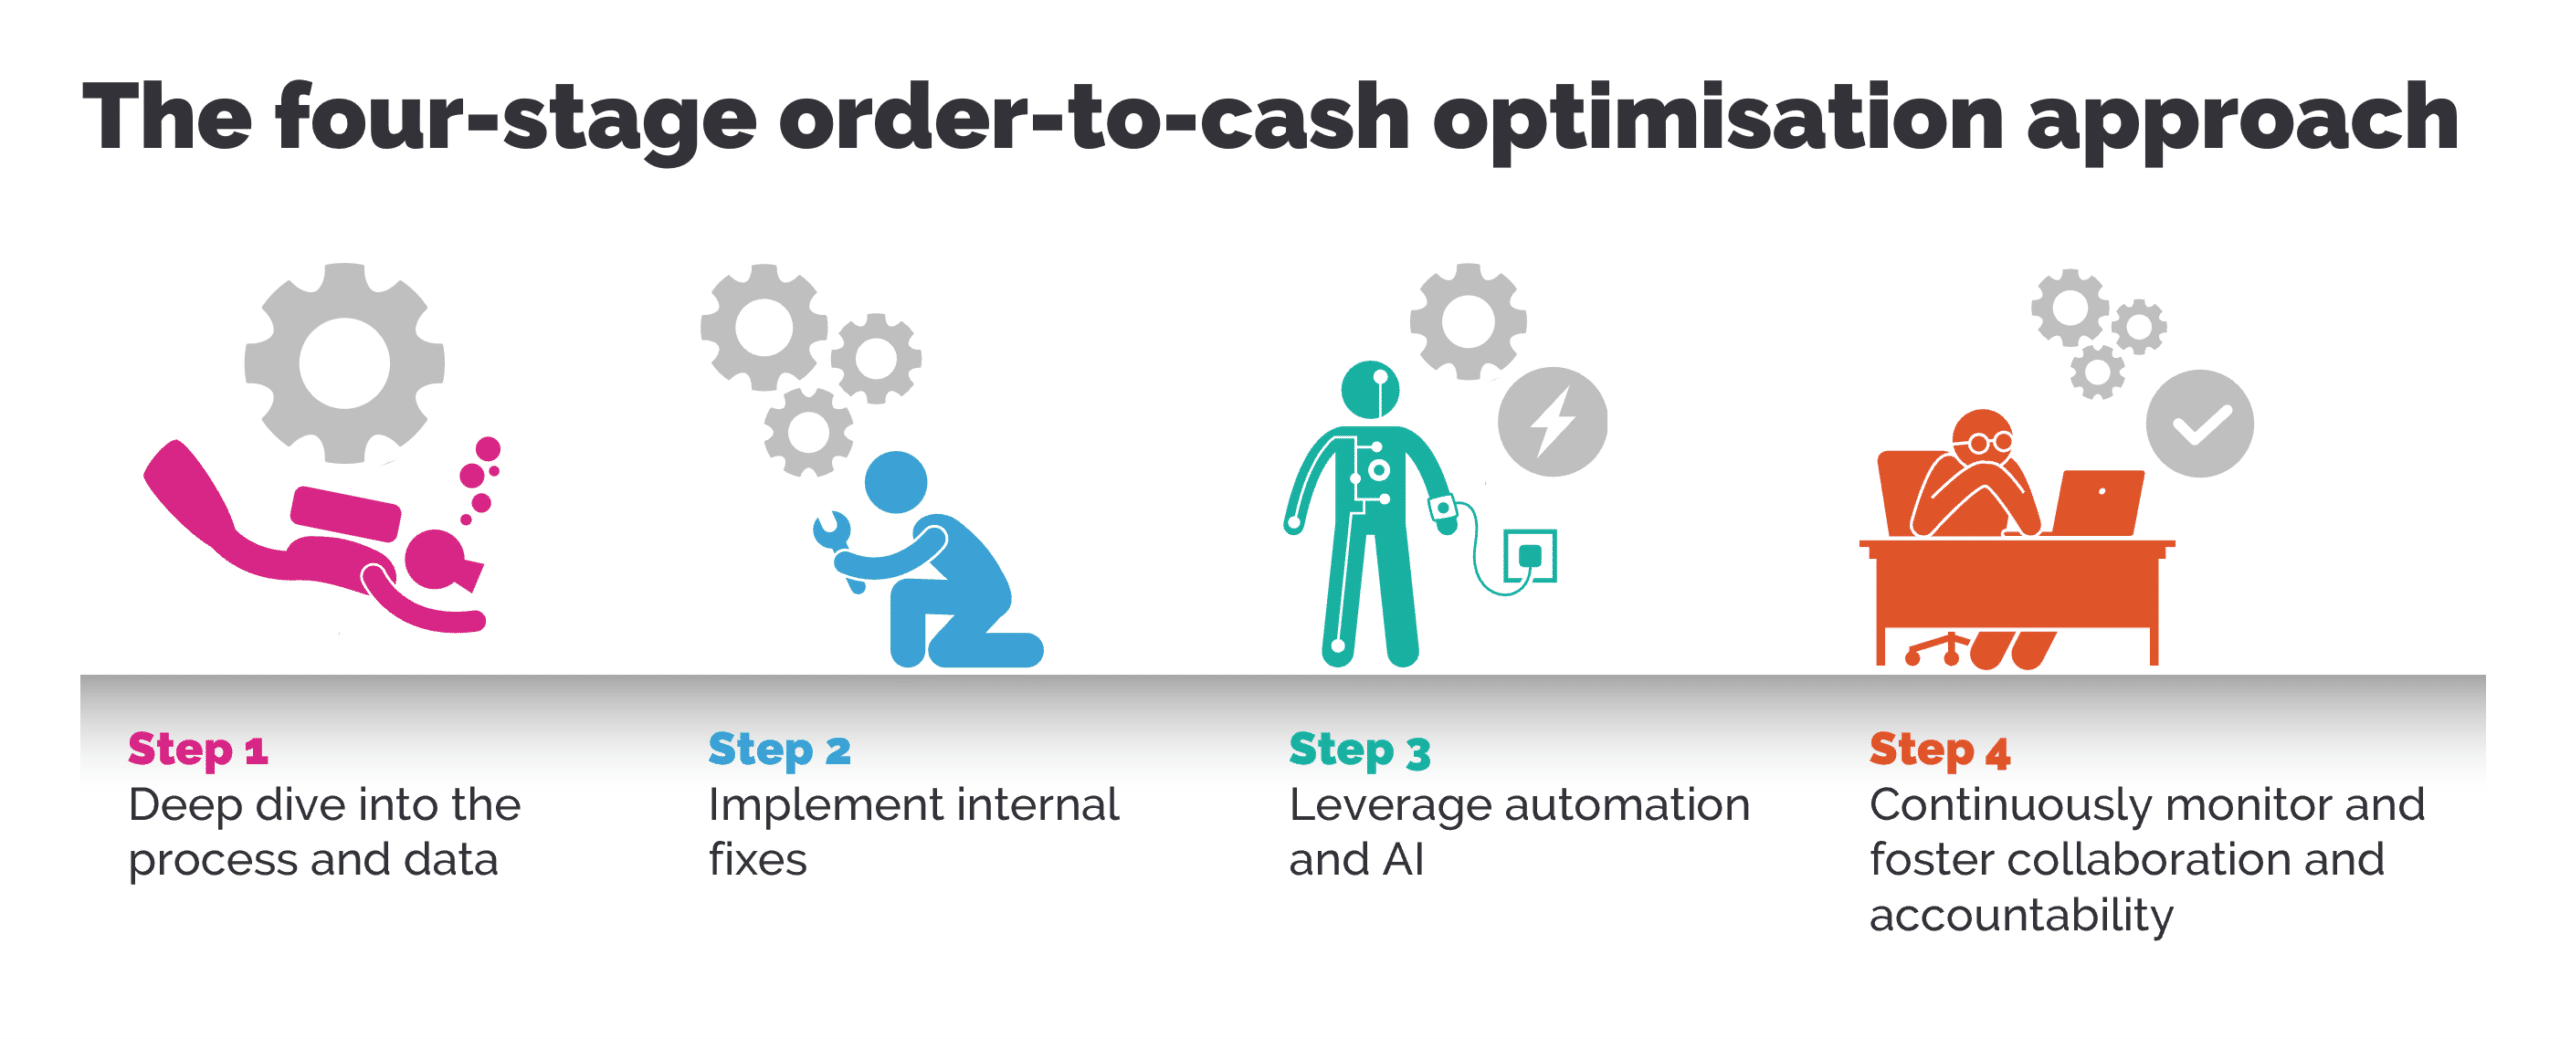 The four-stage order-to-cash optimisation approach